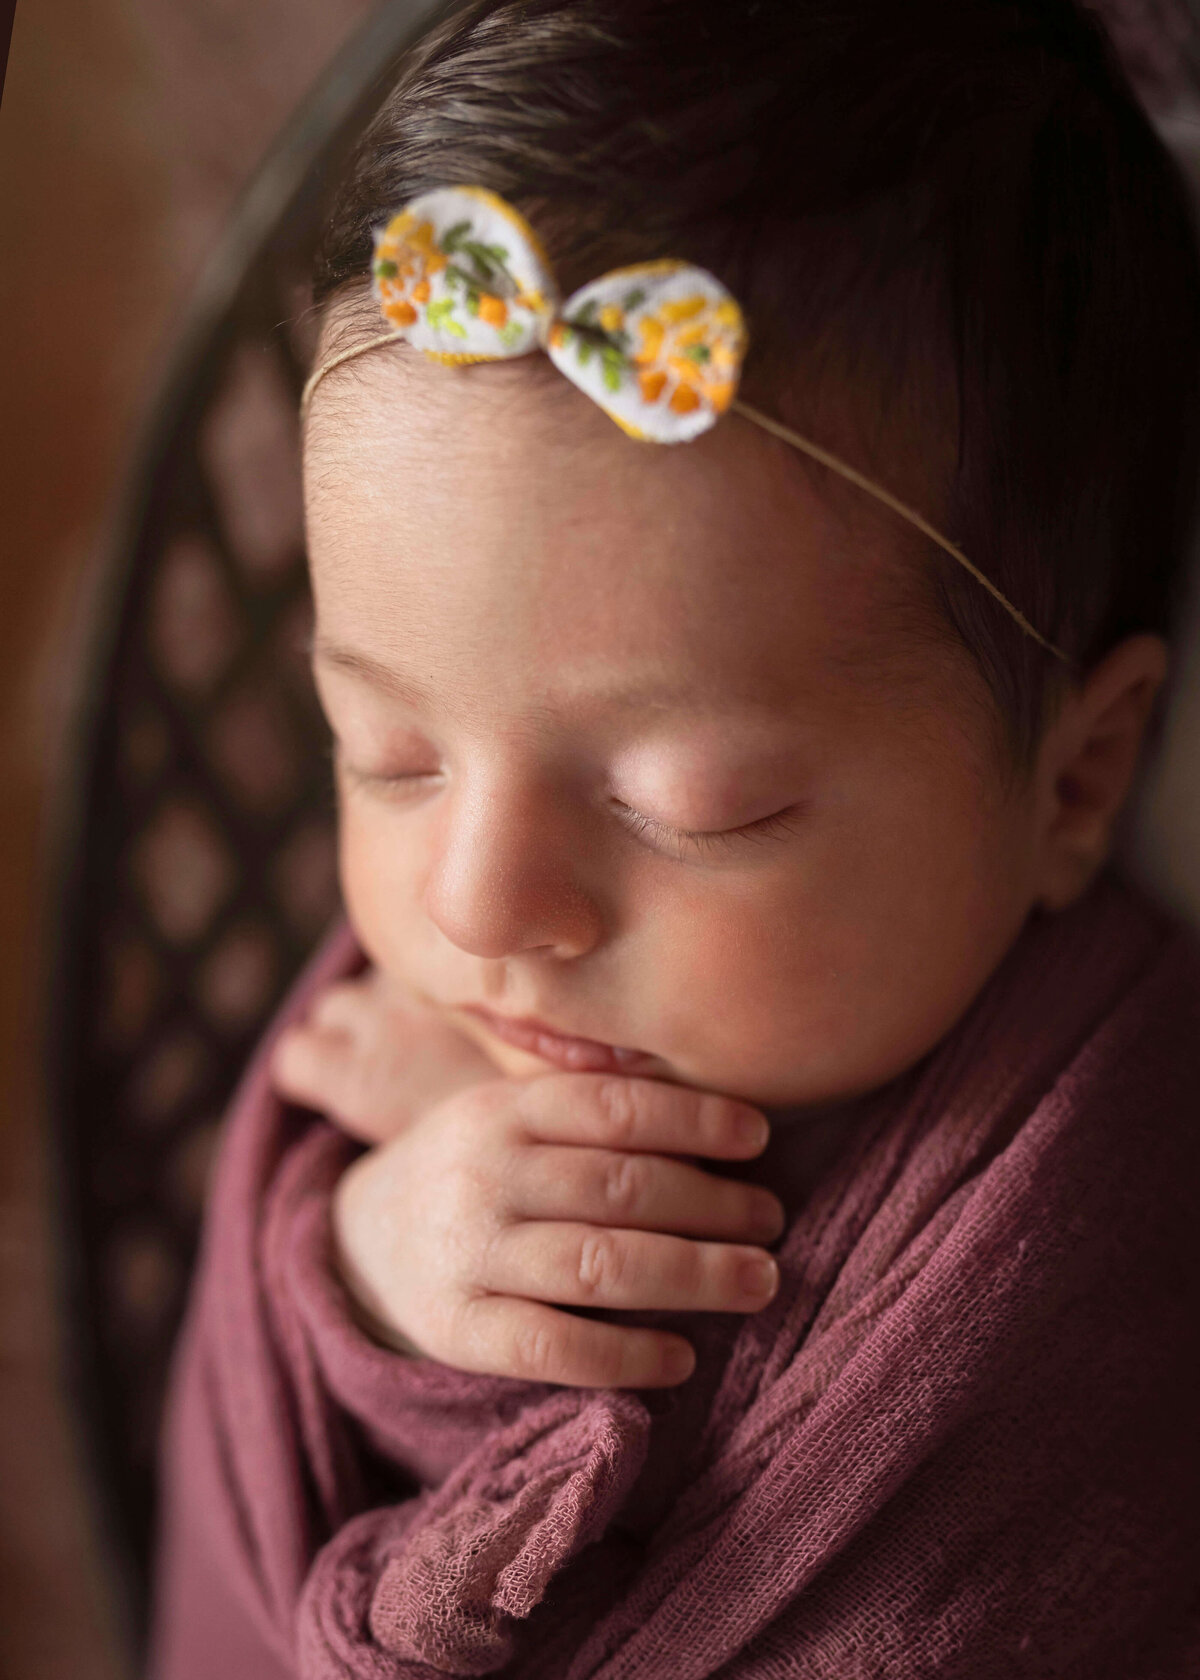 NJ Newborn photographer poses baby's hands by her face